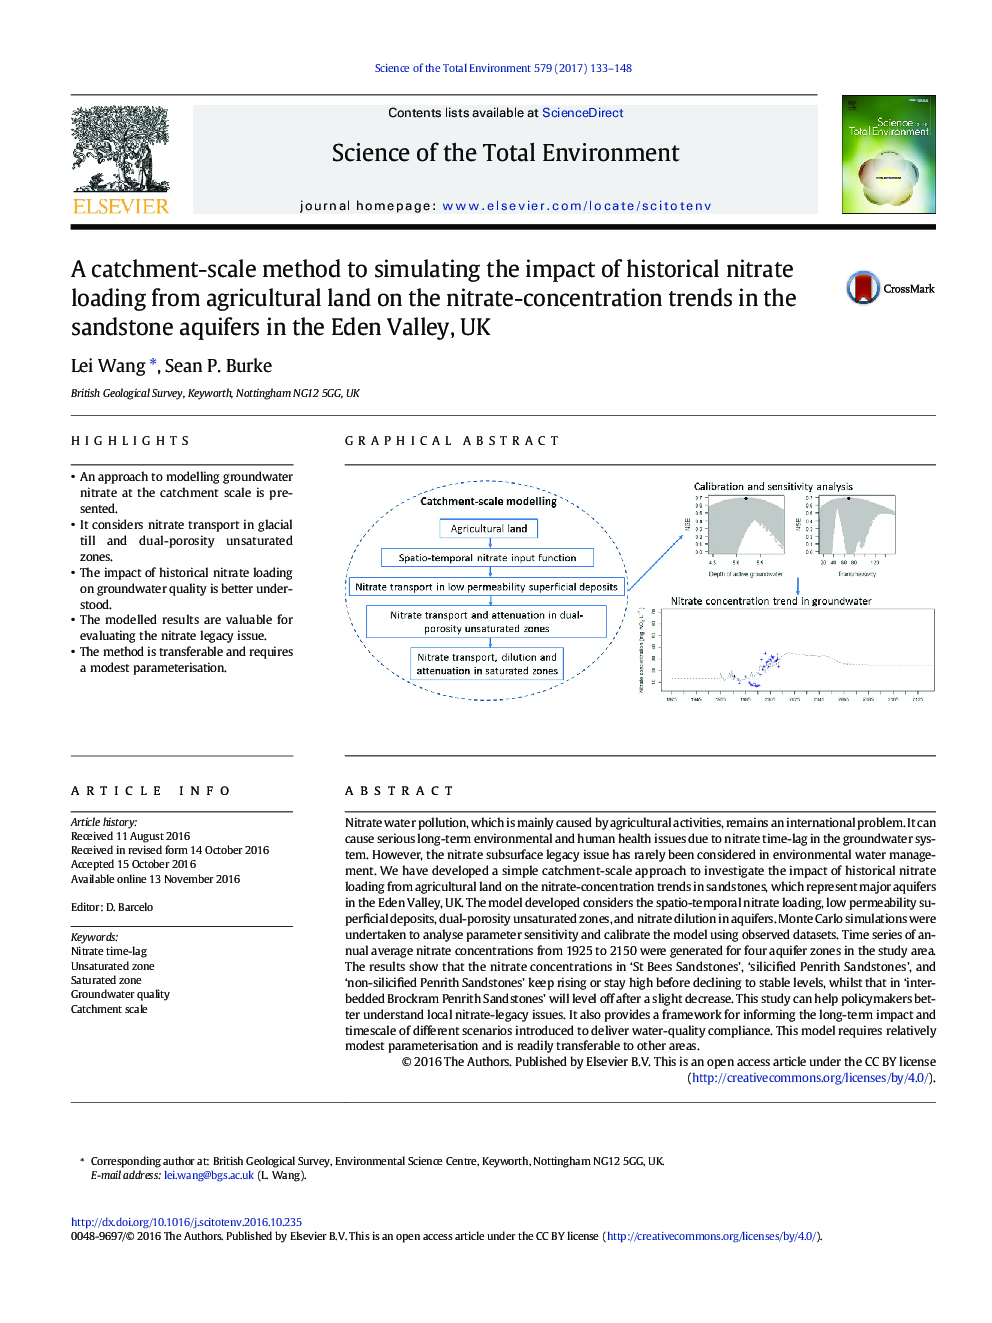 A catchment-scale method to simulating the impact of historical nitrate loading from agricultural land on the nitrate-concentration trends in the sandstone aquifers in the Eden Valley, UK